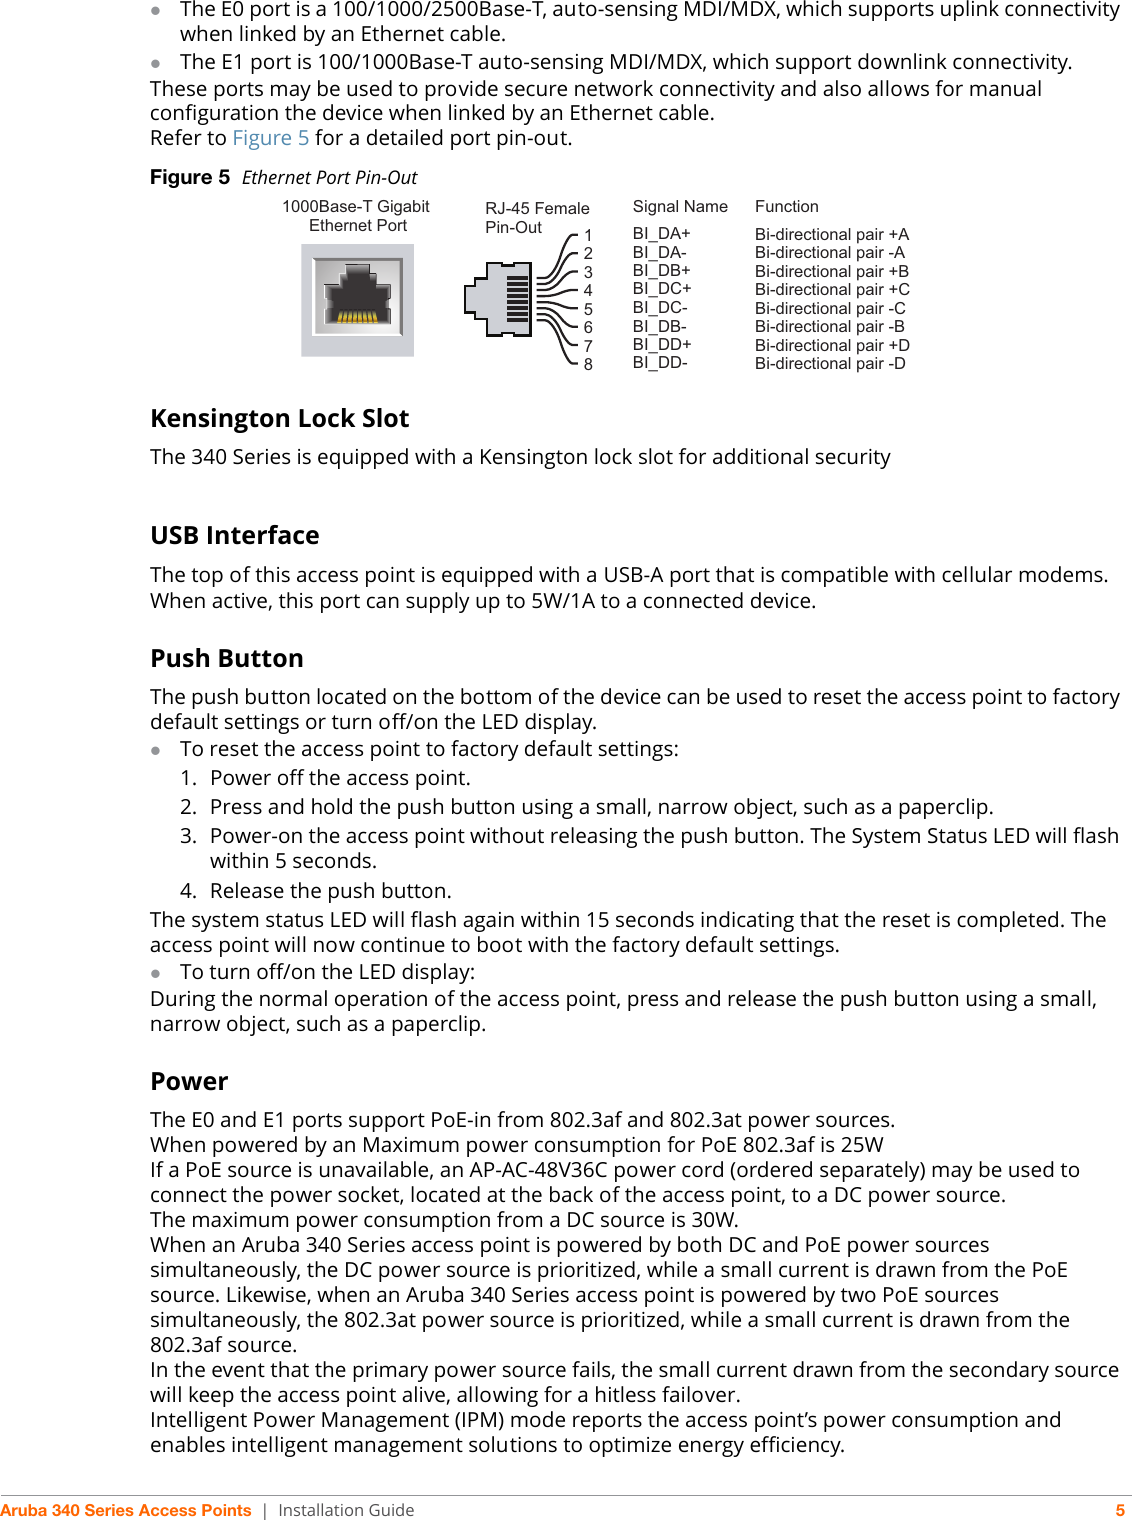 Aruba 340 Series Access Points | Installation Guide 5The E0 port is a 100/1000/2500Base-T, auto-sensing MDI/MDX, which supports uplink connectivity when linked by an Ethernet cable.The E1 port is 100/1000Base-T auto-sensing MDI/MDX, which support downlink connectivity.These ports may be used to provide secure network connectivity and also allows for manual configuration the device when linked by an Ethernet cable. Refer to Figure 5 for a detailed port pin-out. Figure 5  Ethernet Port Pin-OutKensington Lock SlotThe 340 Series is equipped with a Kensington lock slot for additional securityUSB InterfaceThe top of this access point is equipped with a USB-A port that is compatible with cellular modems. When active, this port can supply up to 5W/1A to a connected device.Push ButtonThe push button located on the bottom of the device can be used to reset the access point to factory default settings or turn off/on the LED display. To reset the access point to factory default settings:1. Power off the access point.2. Press and hold the push button using a small, narrow object, such as a paperclip.3. Power-on the access point without releasing the push button. The System Status LED will flash within 5 seconds.4. Release the push button.The system status LED will flash again within 15 seconds indicating that the reset is completed. The access point will now continue to boot with the factory default settings.To turn off/on the LED display:During the normal operation of the access point, press and release the push button using a small, narrow object, such as a paperclip. Power The E0 and E1 ports support PoE-in from 802.3af and 802.3at power sources. When powered by an Maximum power consumption for PoE 802.3af is 25WIf a PoE source is unavailable, an AP-AC-48V36C power cord (ordered separately) may be used to connect the power socket, located at the back of the access point, to a DC power source. The maximum power consumption from a DC source is 30W. When an Aruba 340 Series access point is powered by both DC and PoE power sources simultaneously, the DC power source is prioritized, while a small current is drawn from the PoE source. Likewise, when an Aruba 340 Series access point is powered by two PoE sources simultaneously, the 802.3at power source is prioritized, while a small current is drawn from the 802.3af source.In the event that the primary power source fails, the small current drawn from the secondary source will keep the access point alive, allowing for a hitless failover.Intelligent Power Management (IPM) mode reports the access point’s power consumption and enables intelligent management solutions to optimize energy efficiency.1000Base-T Gigabit Ethernet PortRJ-45 FemalePin-OutSignal Name12345678BI_DC+BI_DC-BI_DD+BI_DD-BI_DA+BI_DA-BI_DB+BI_DB-FunctionBi-directional pair +CBi-directional pair -CBi-directional pair +DBi-directional pair -DBi-directional pair +ABi-directional pair -ABi-directional pair +BBi-directional pair -B     